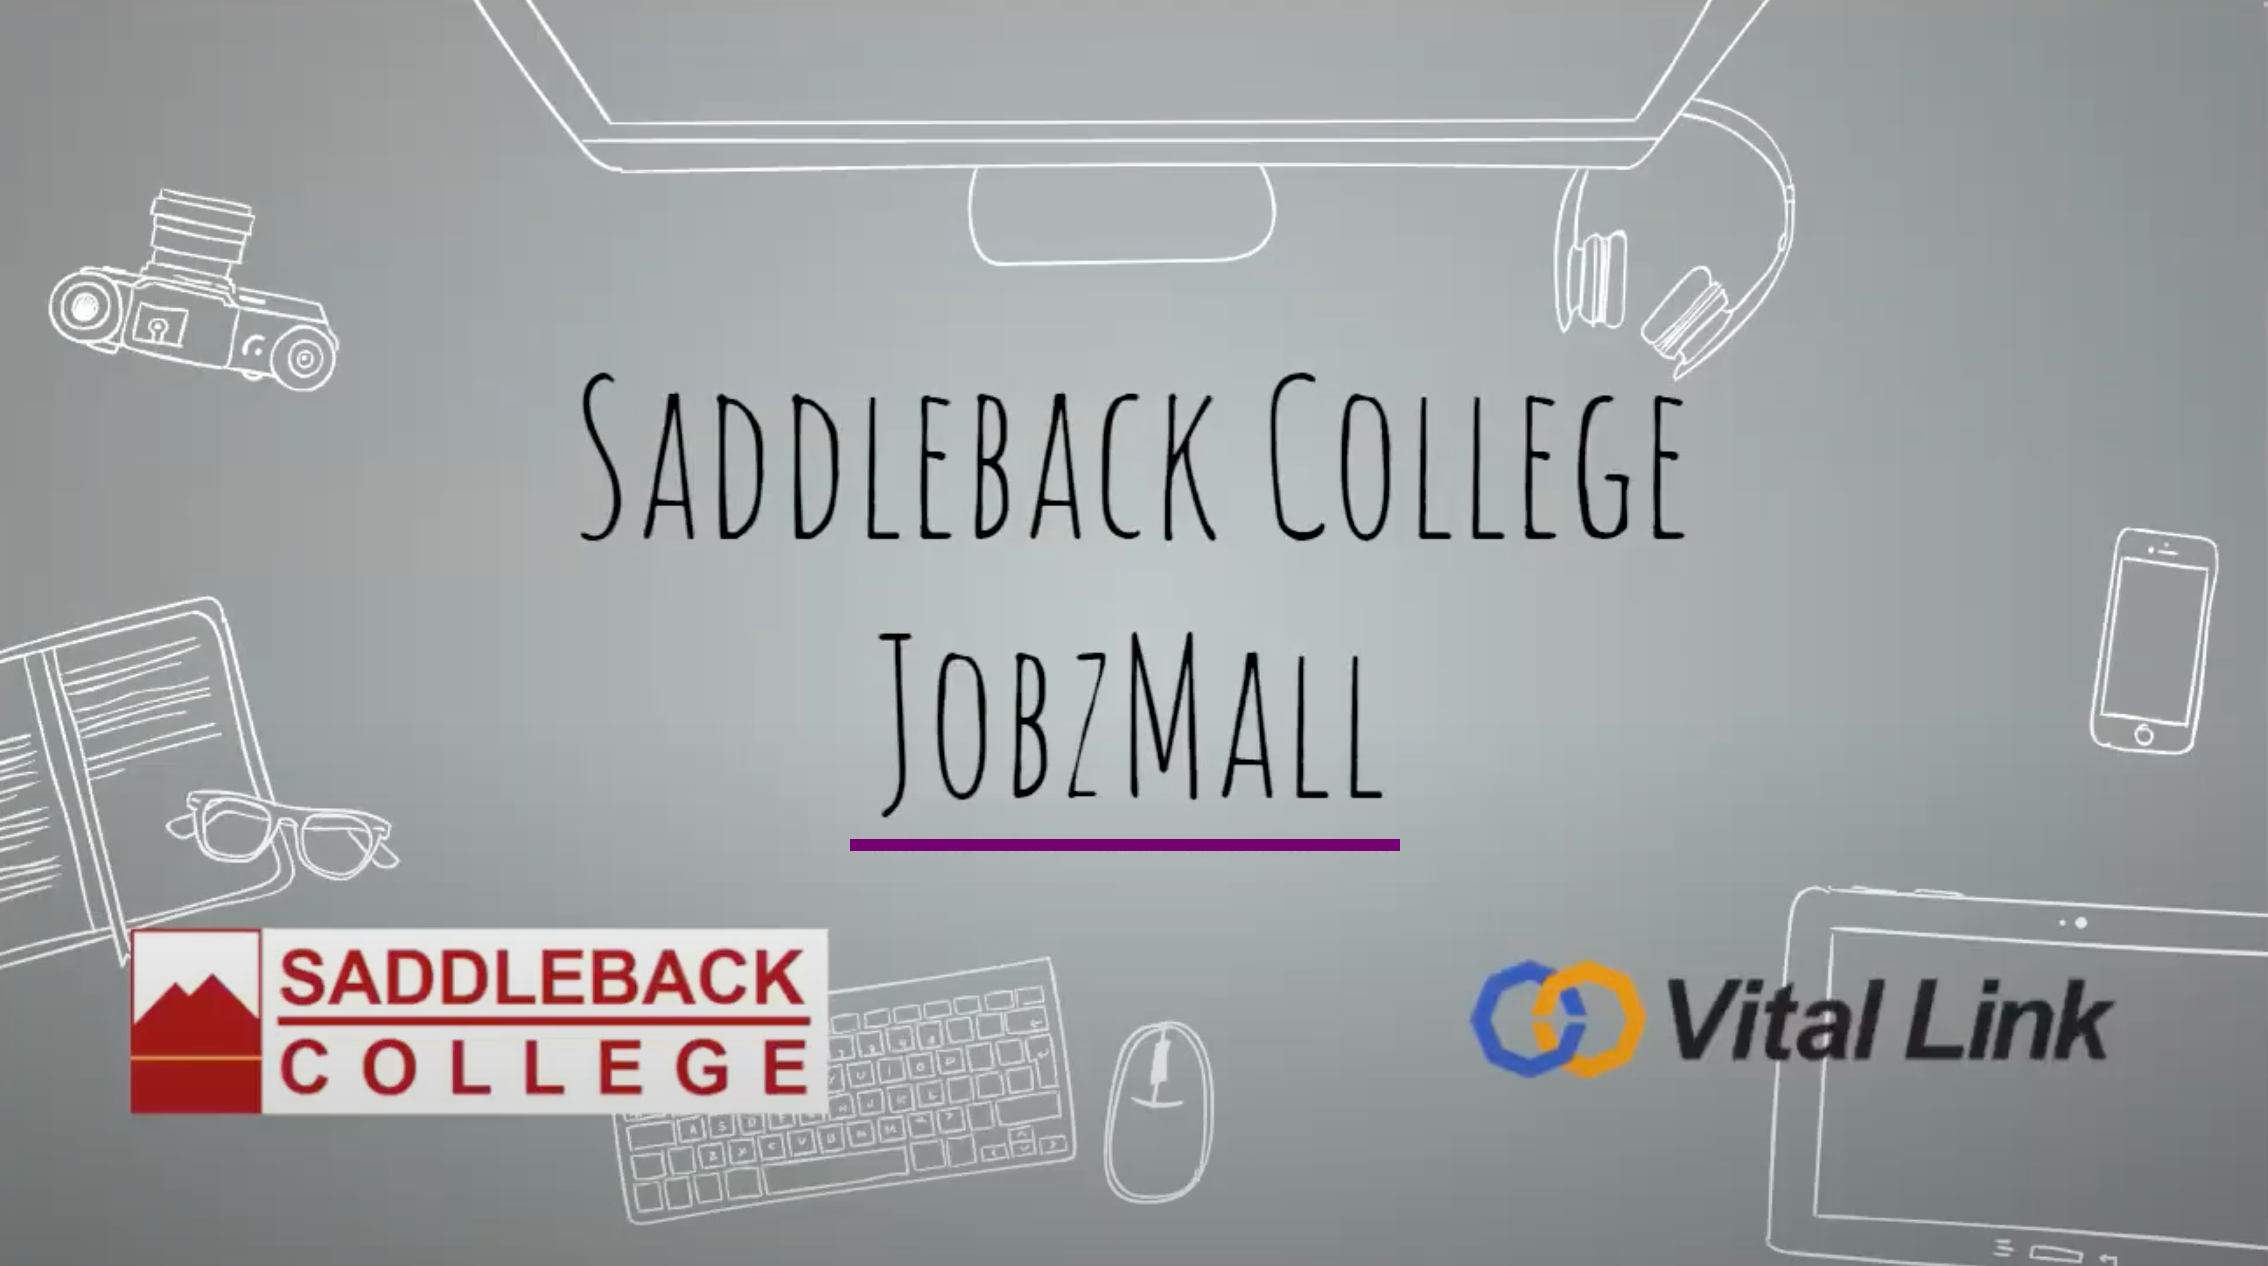 JobzMall featured in Saddleback College NEXT Academy by Vital Link